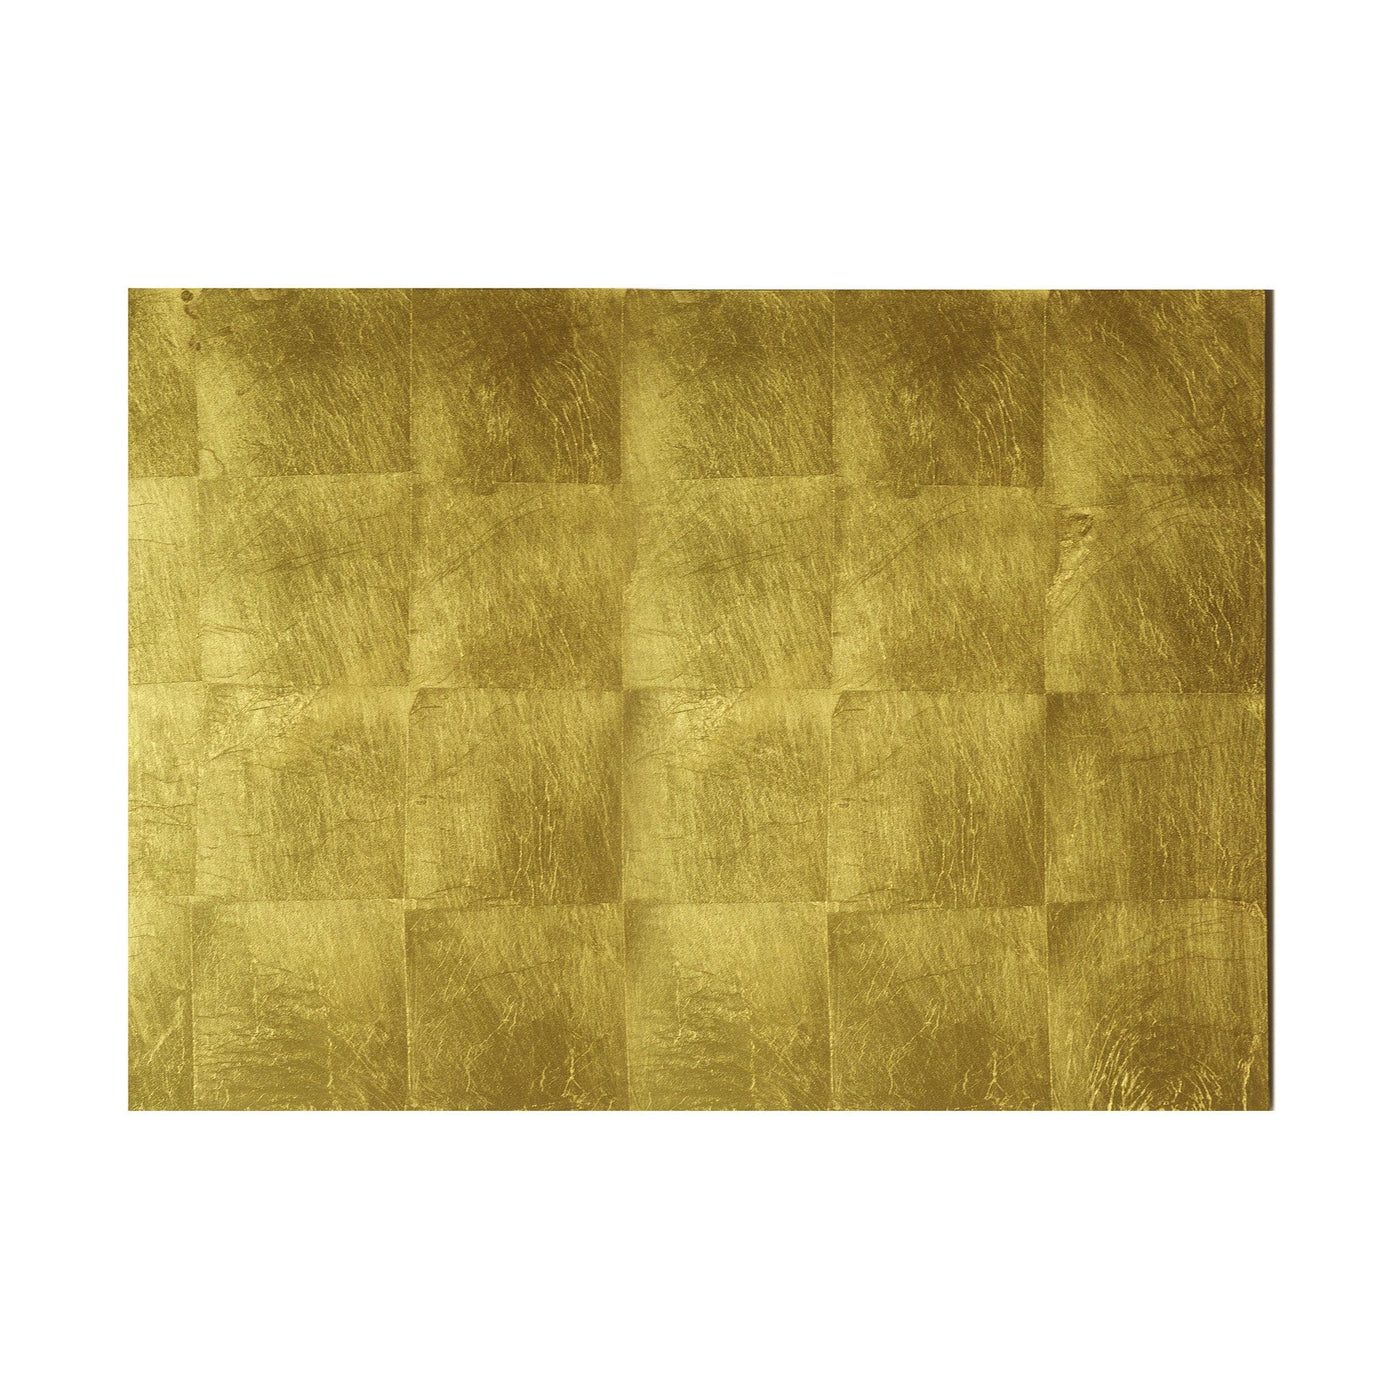 Grand Placemat/Serving Mat in Gold Leaf - Posh Trading Company  - Interior furnishings london